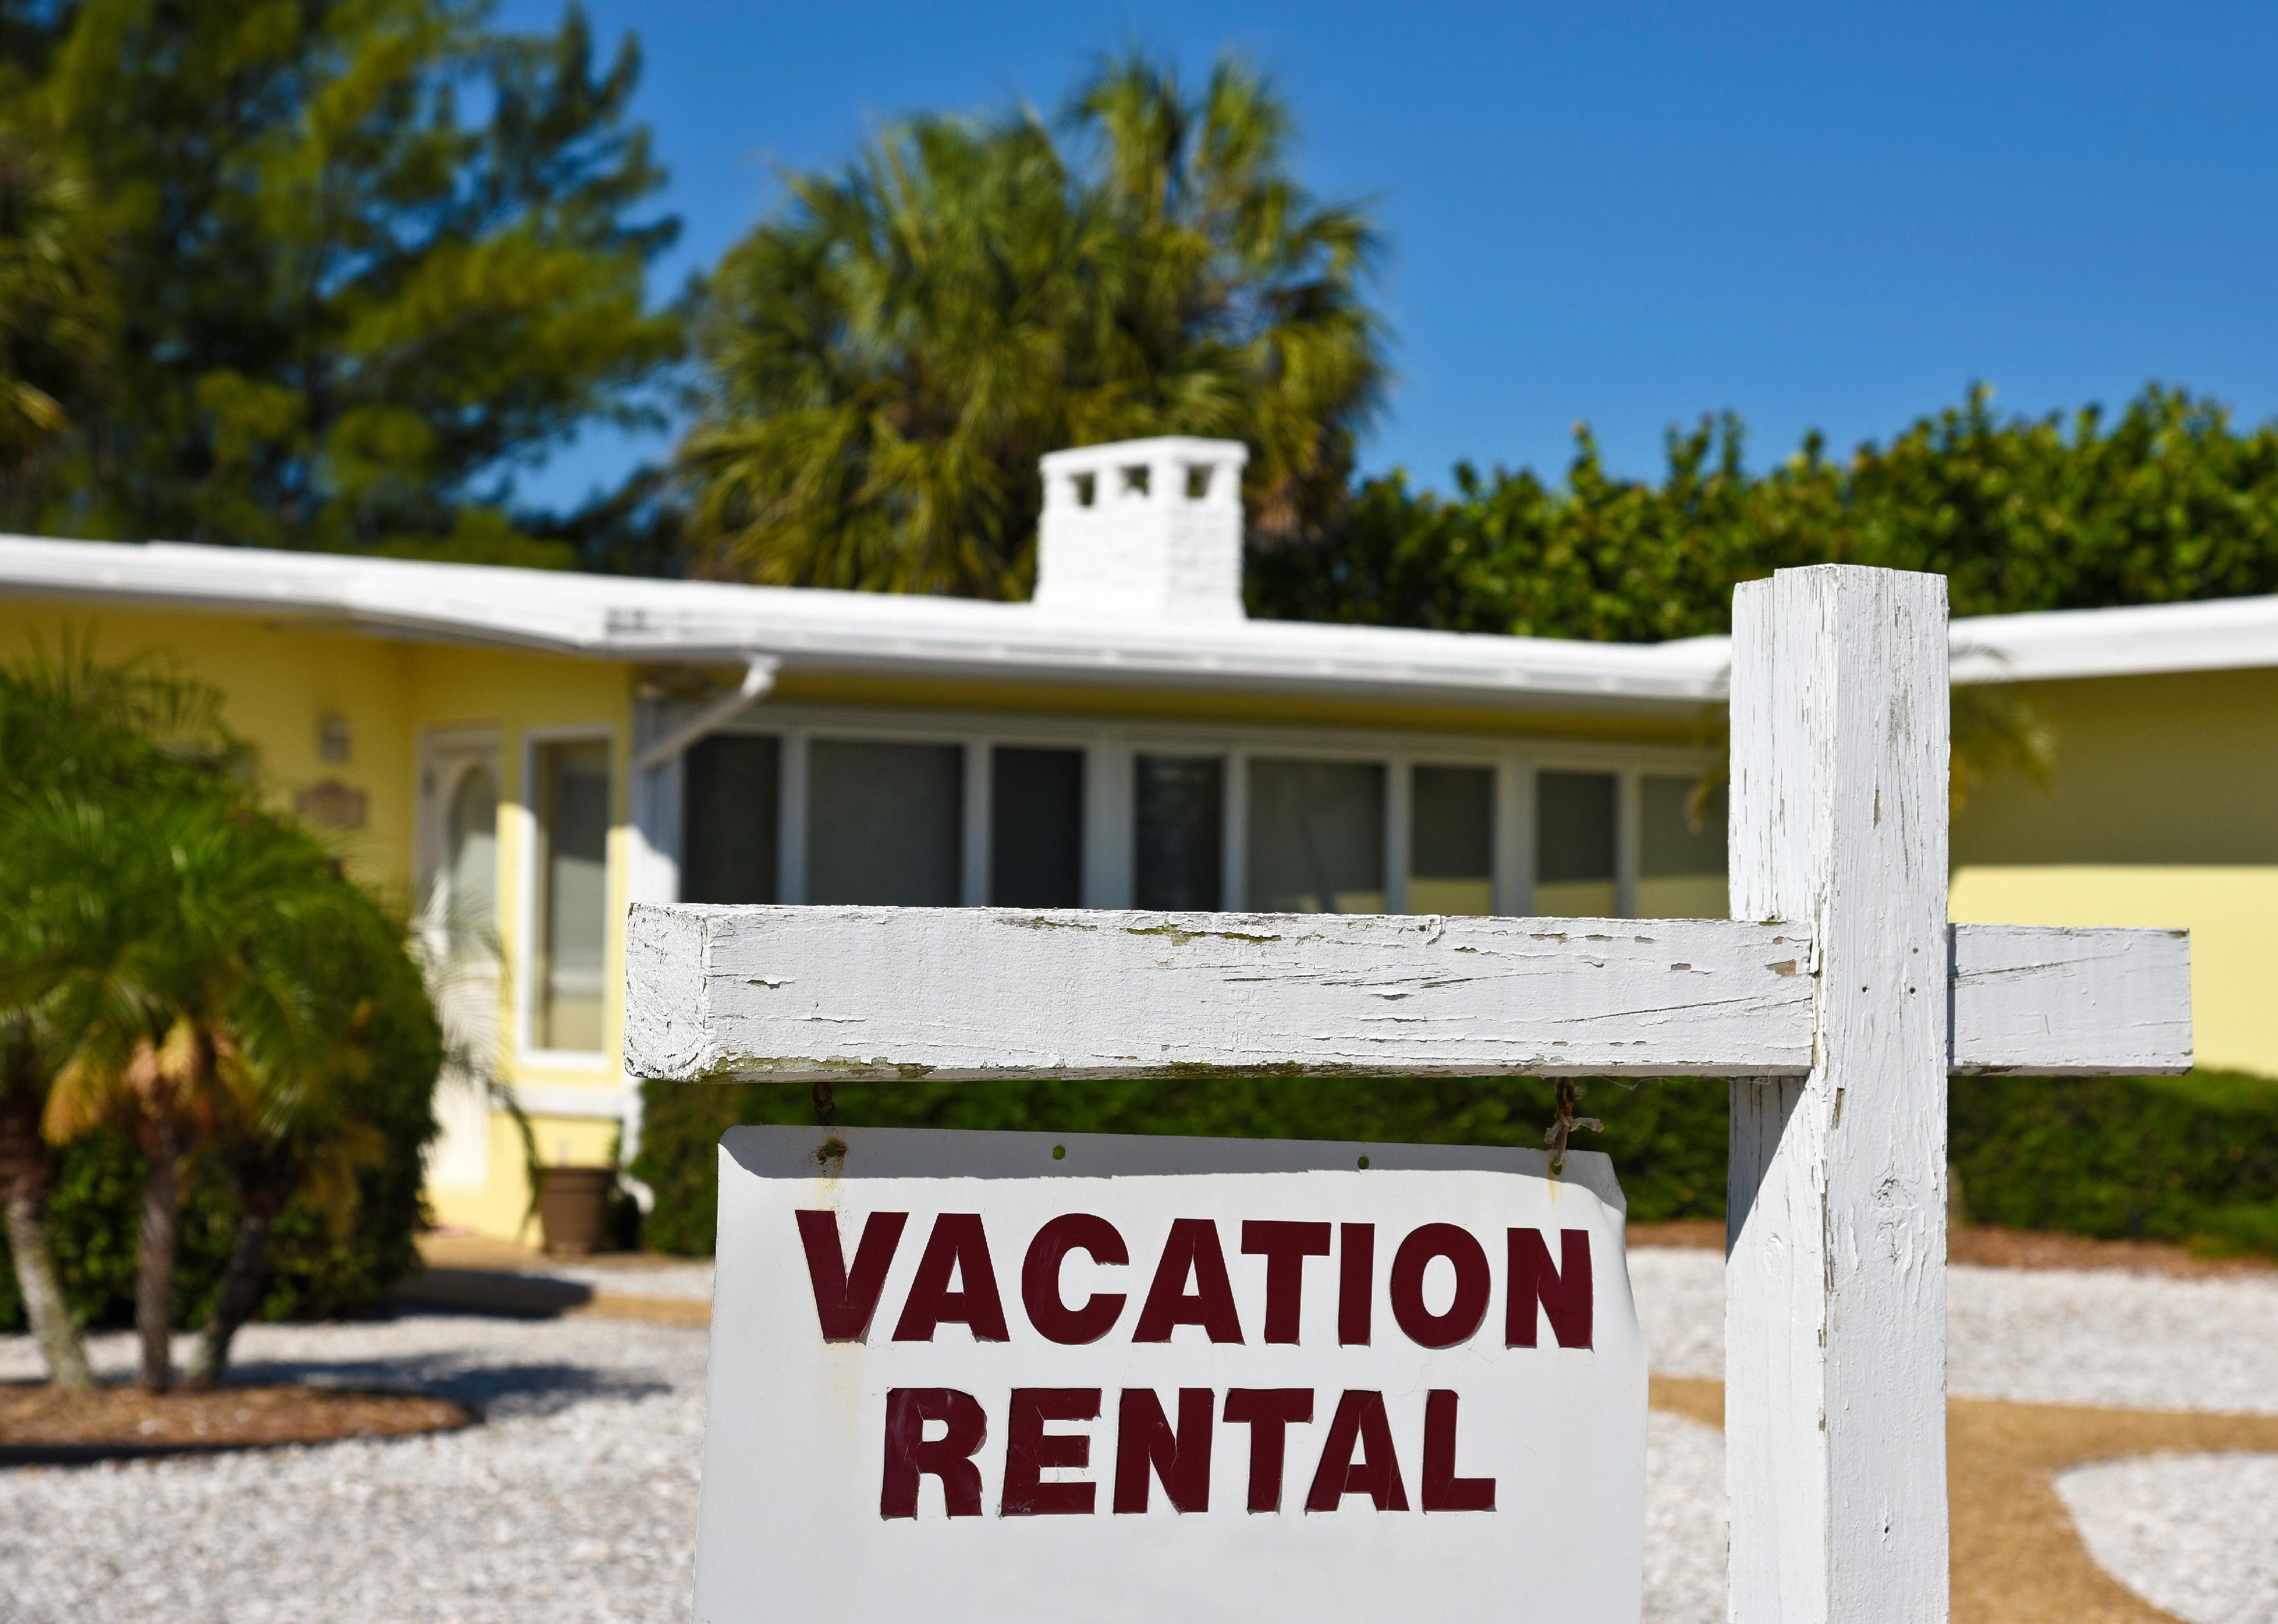 A vacation rental sign in front of a yellow one story home on the beach.